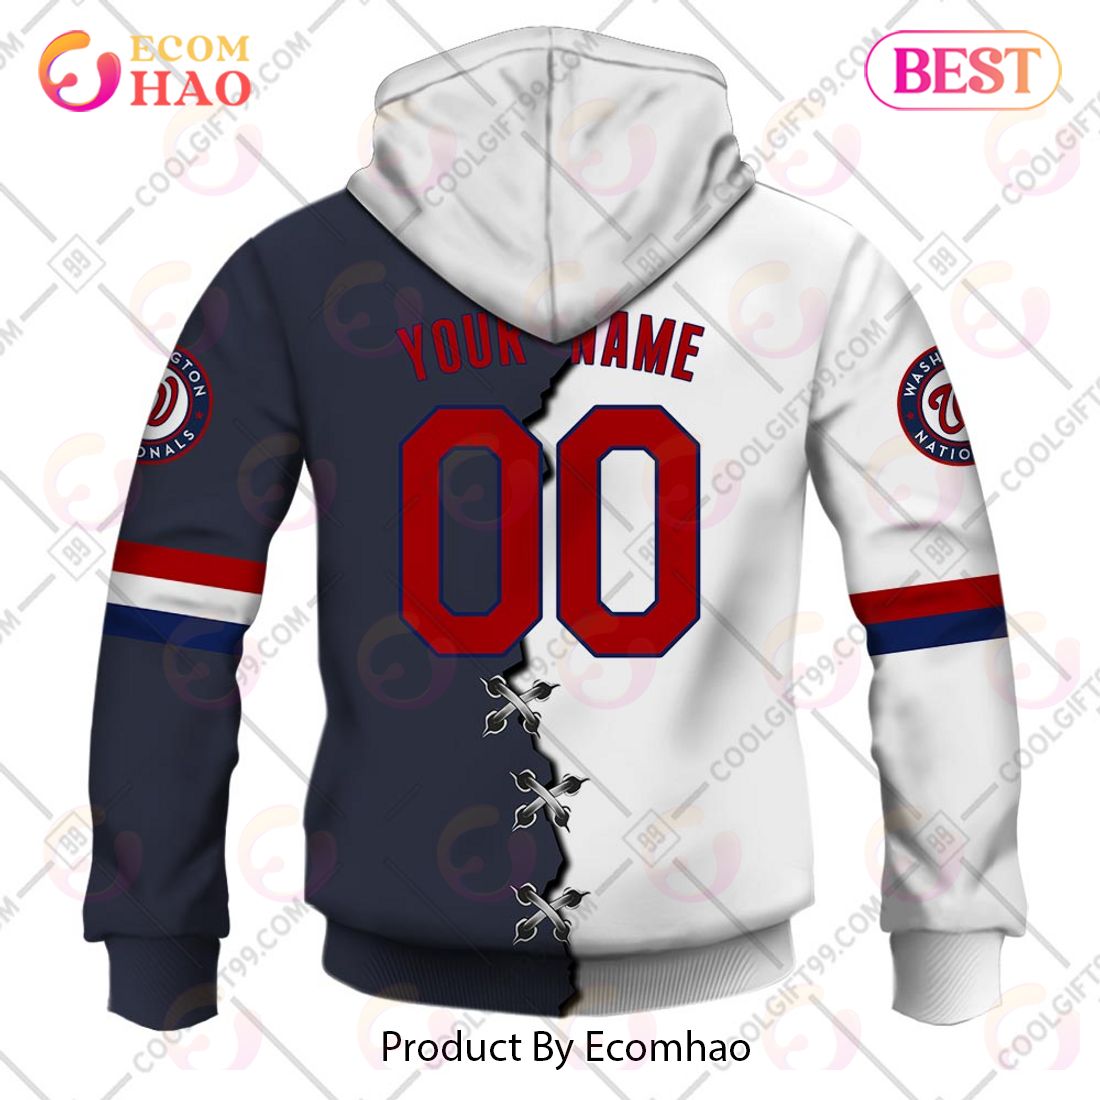 Washington Nationals MLB Personalized Hunting Camouflage Hoodie T